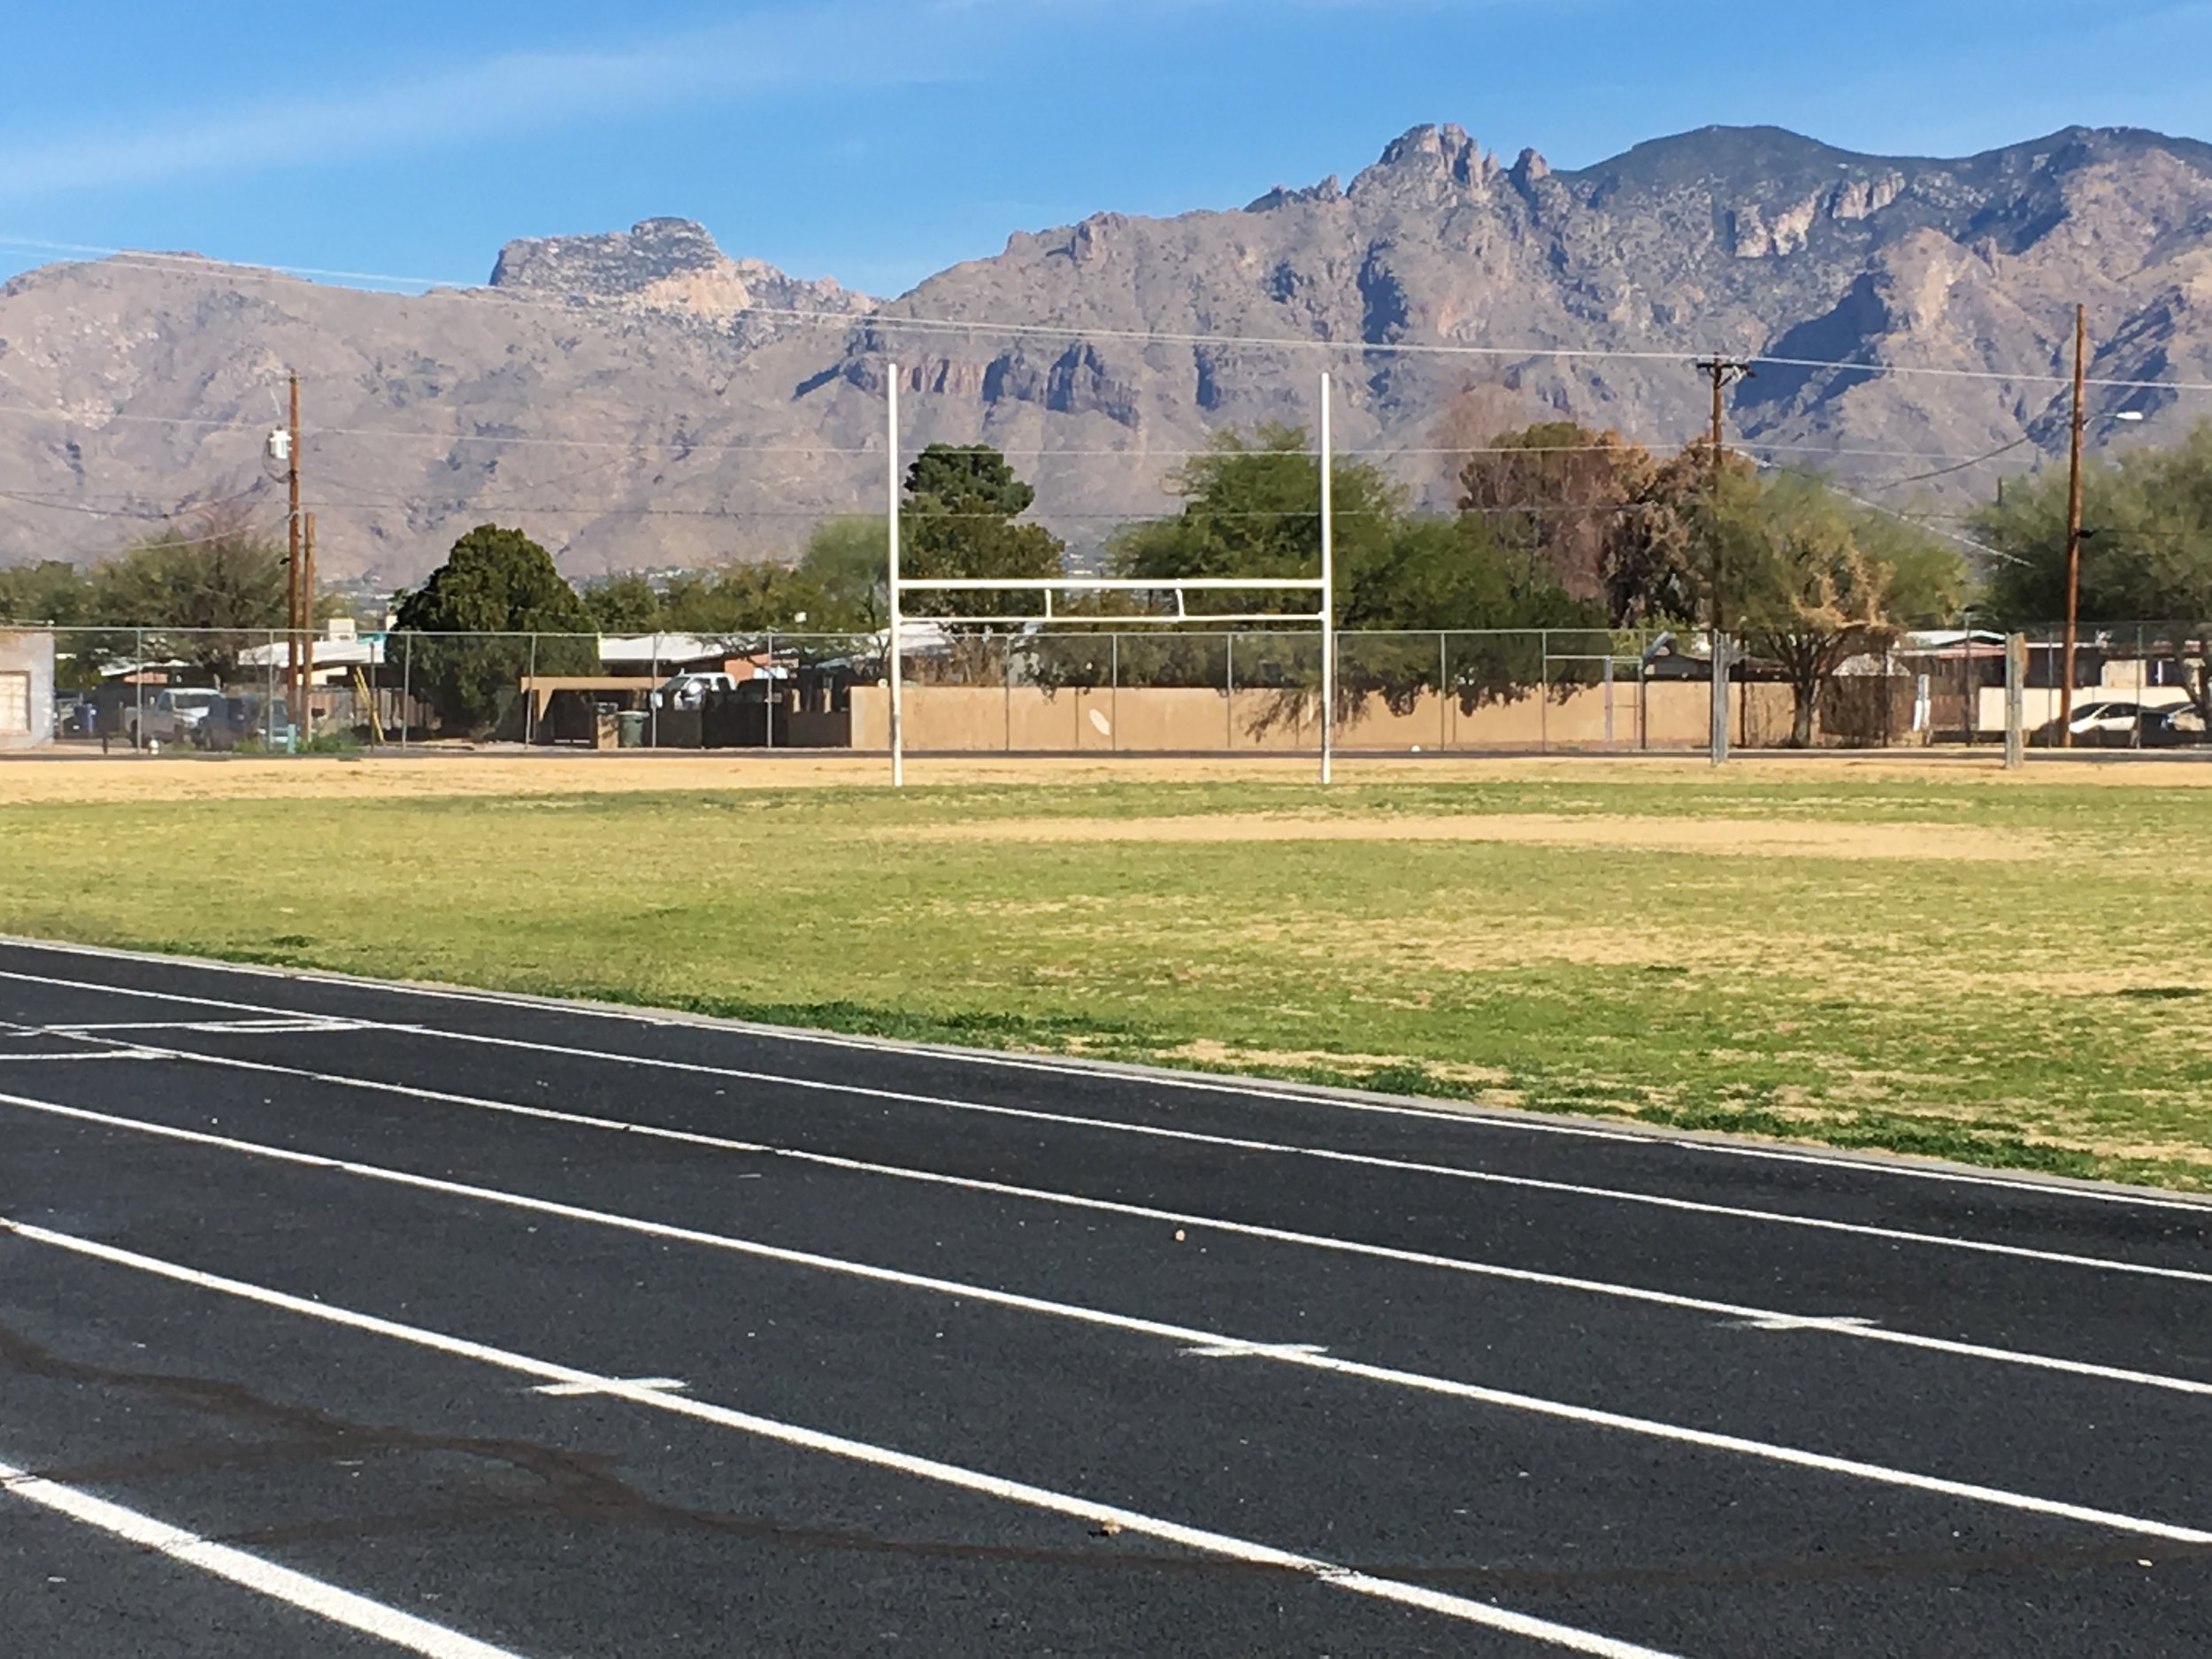 Track with a view – Tucson 2018